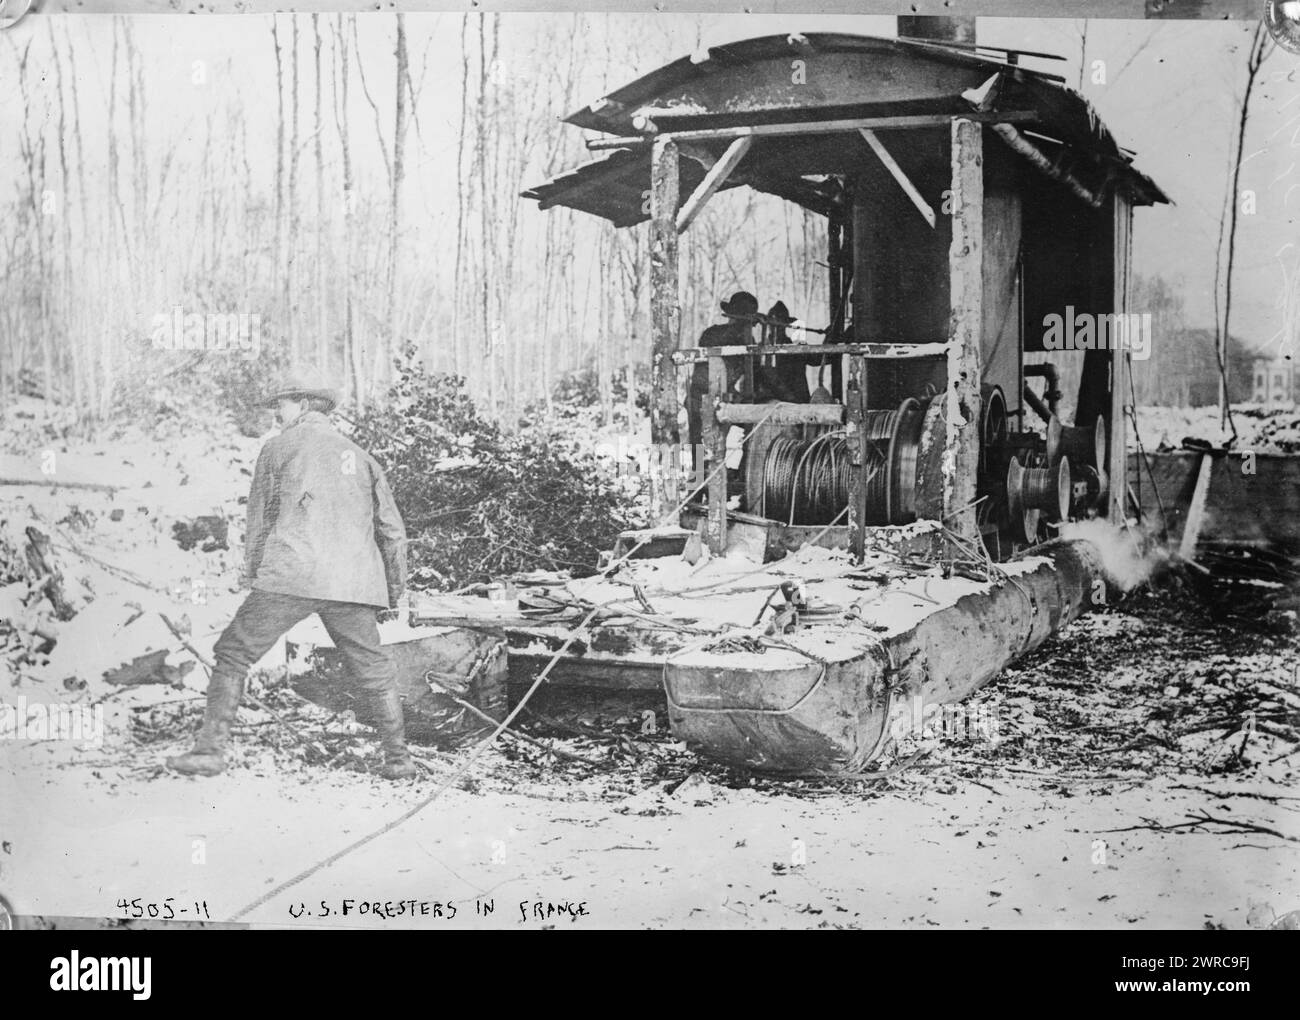 U.S. foresters in France, Photograph shows U.S. Forestry Service engineers in Europe during World War I. The soldiers procured lumber for the war effort., 1917 or 1918, World War, 1914-1918, Glass negatives, 1 negative: glass Stock Photo